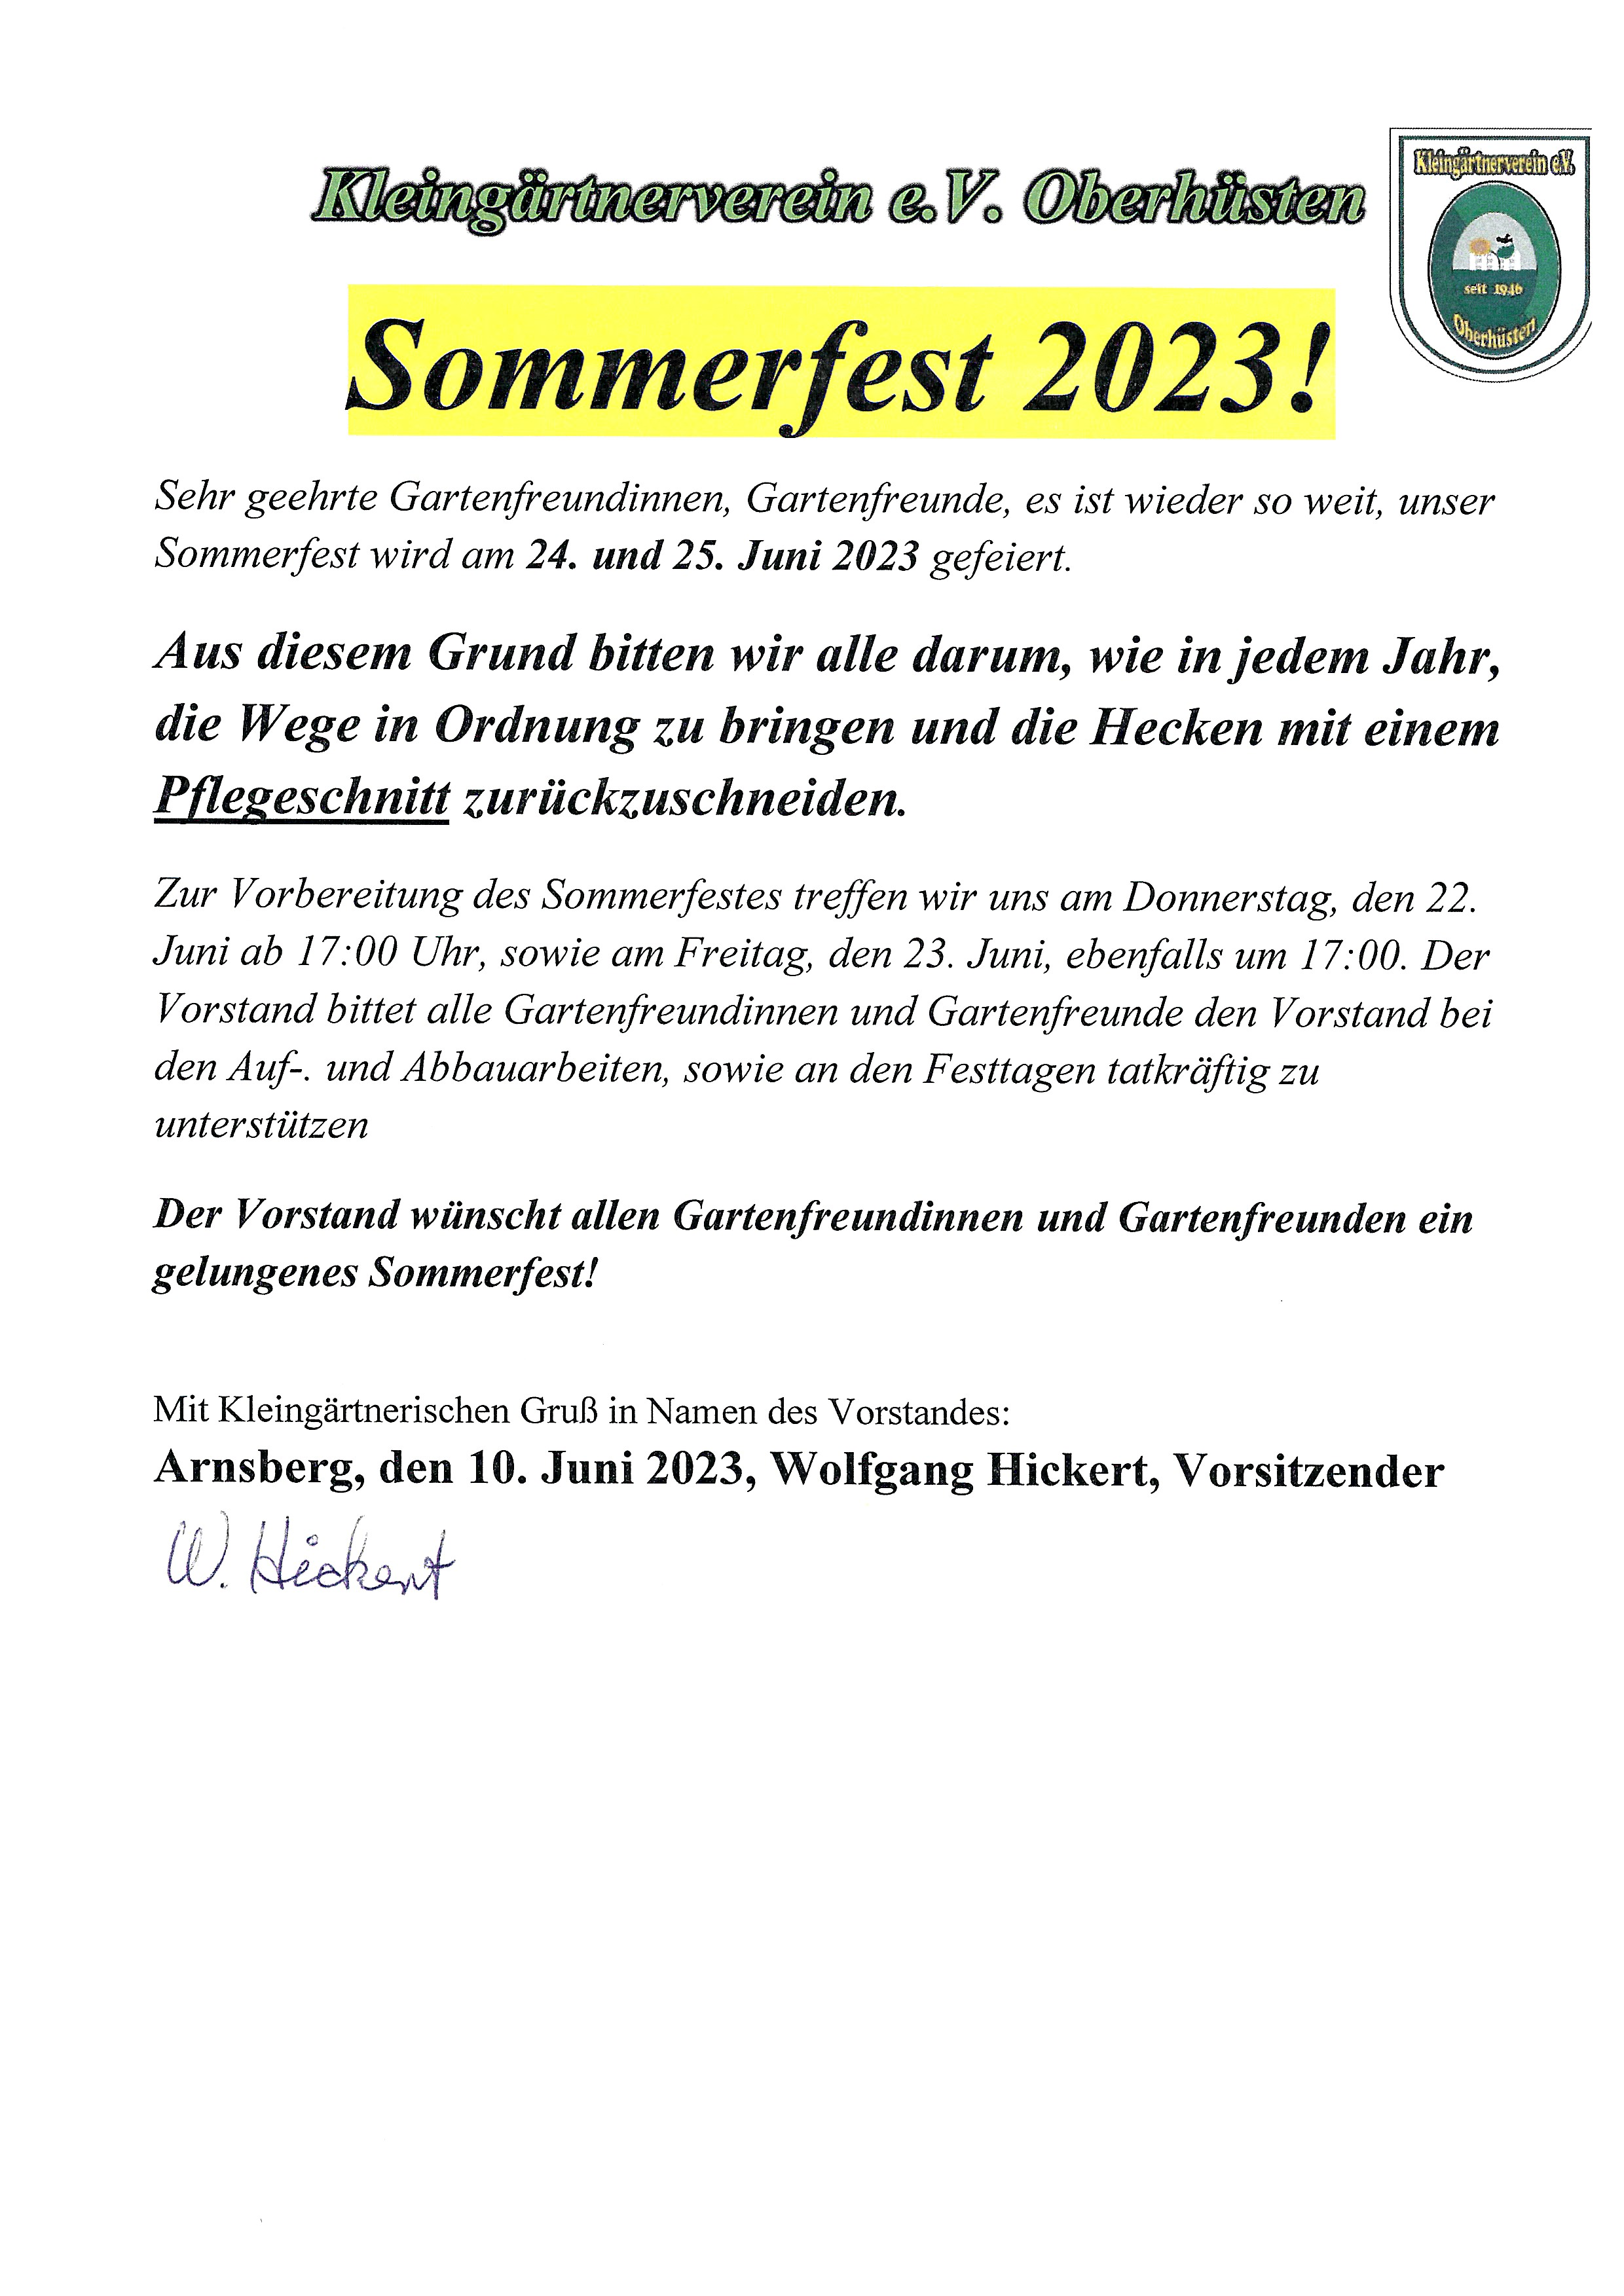 sommerfest-23-vorbereitung.png